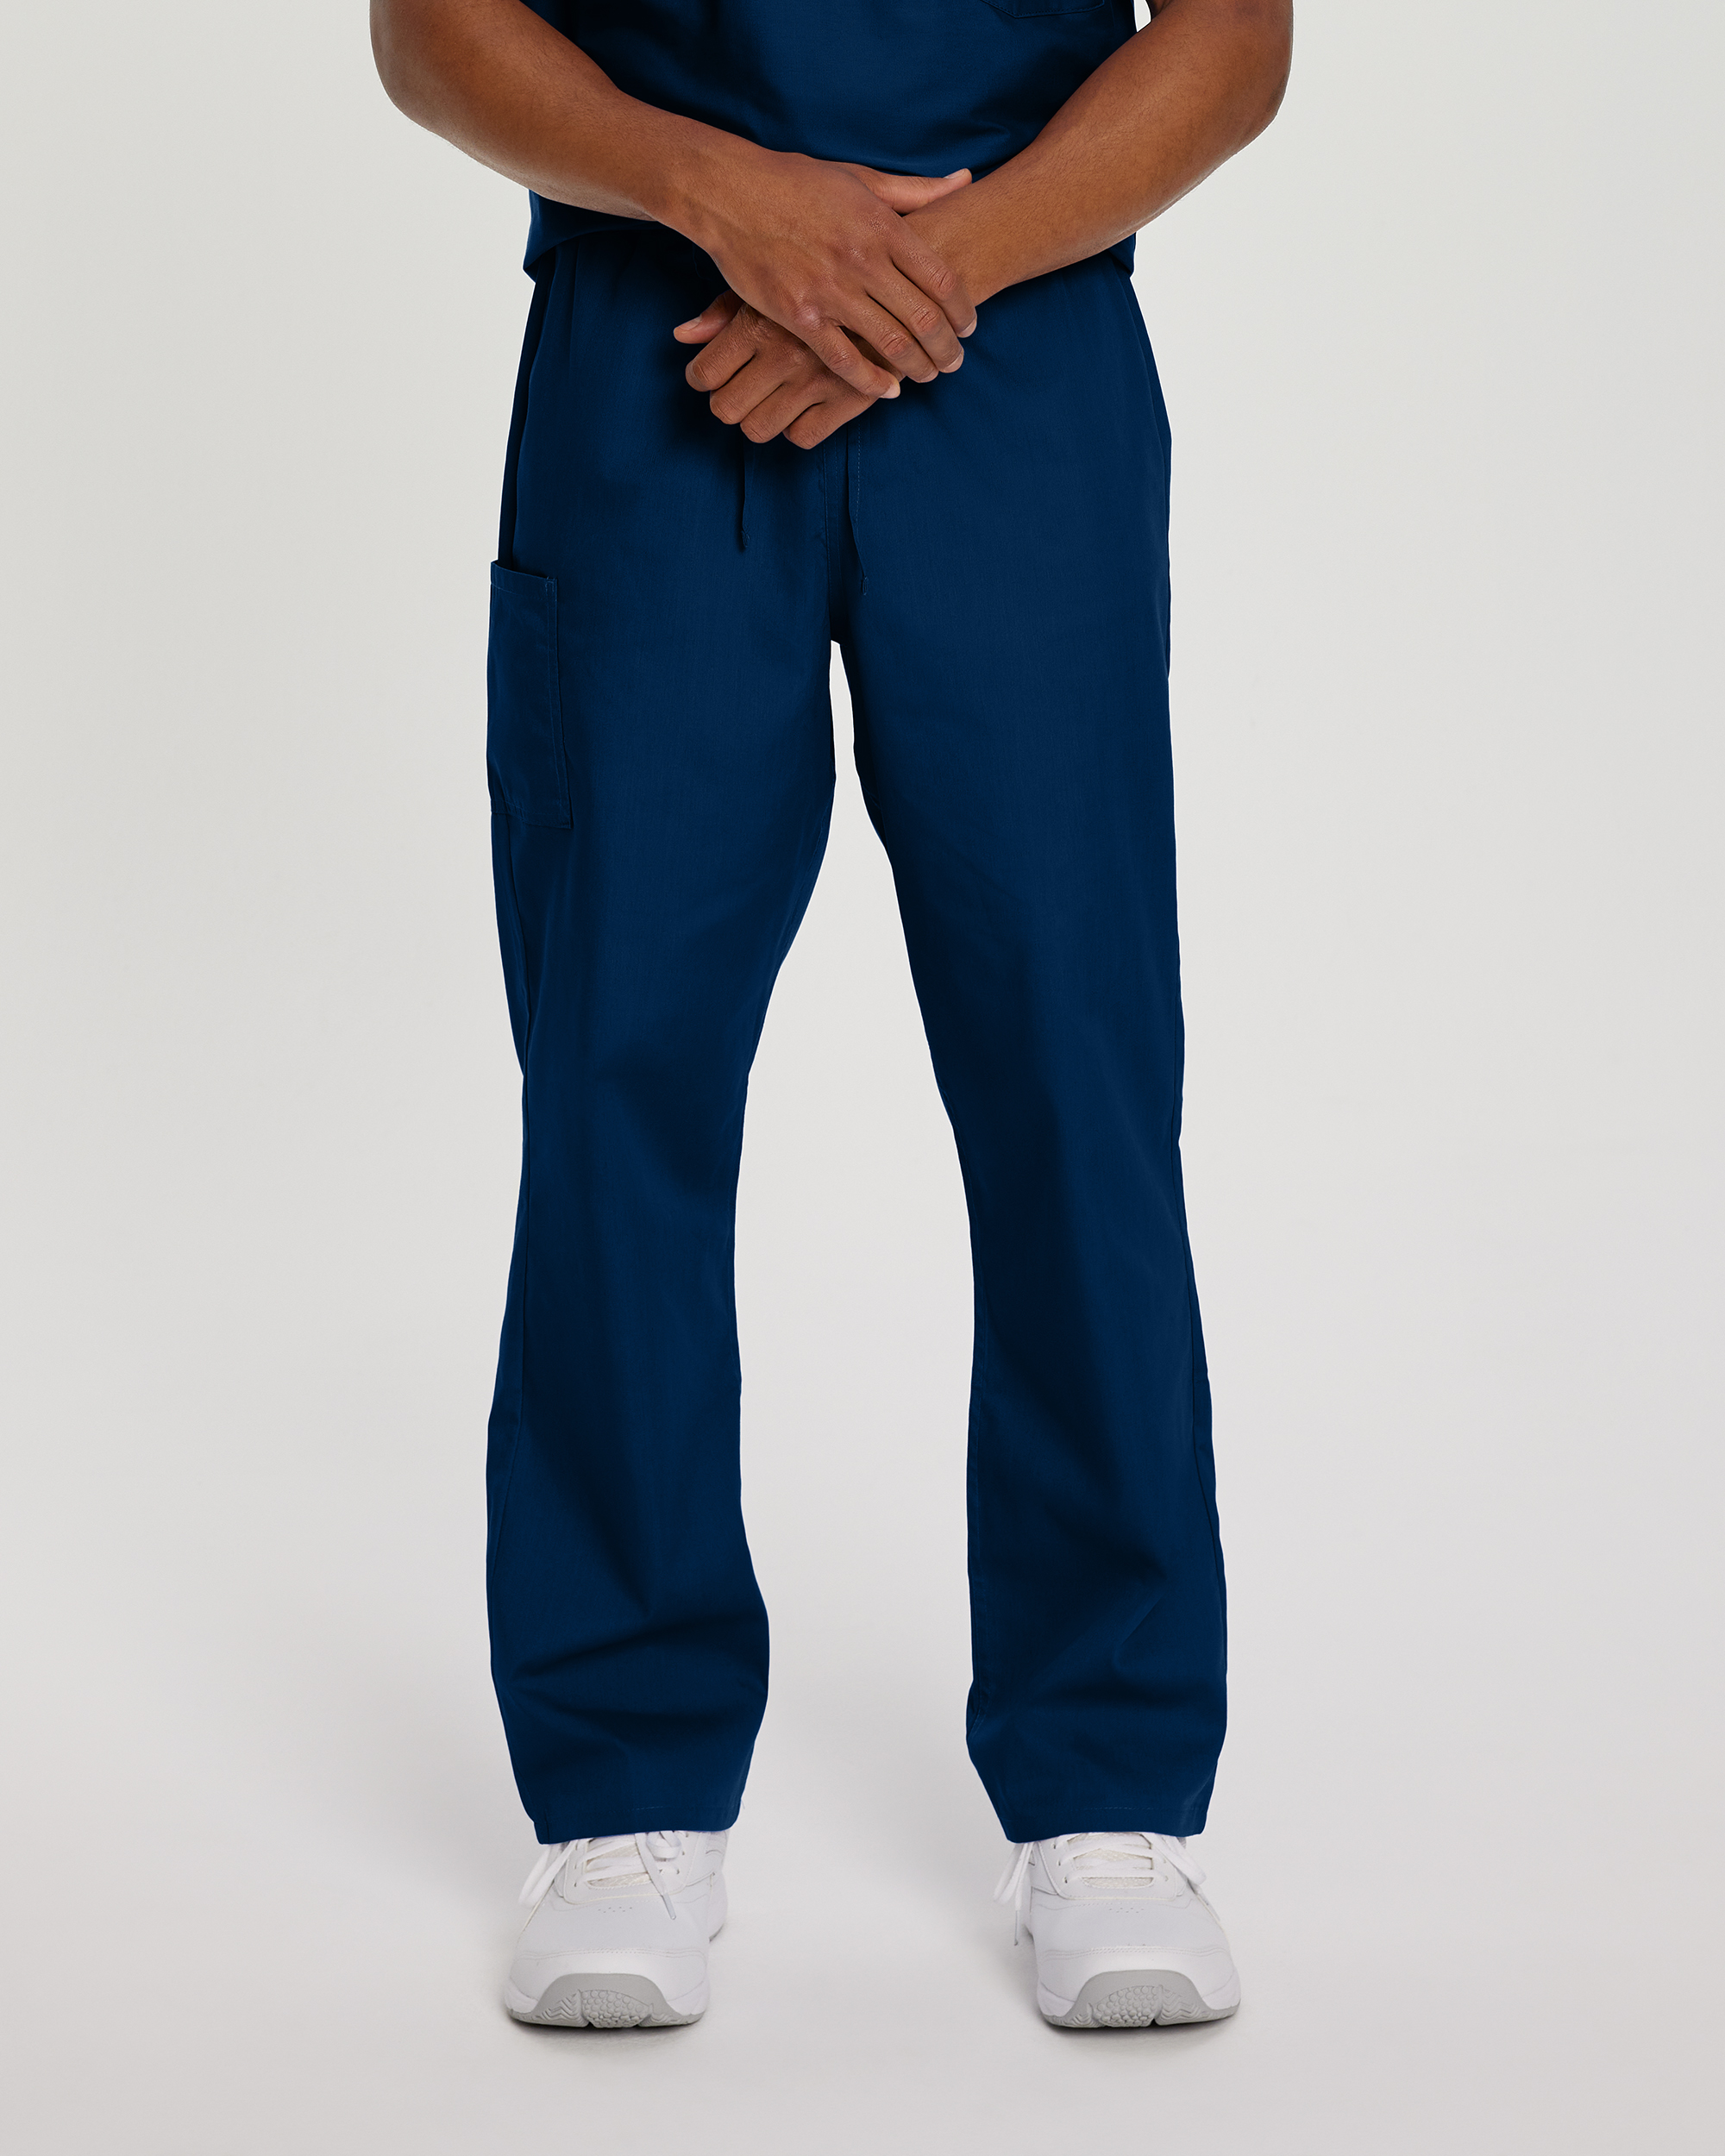 Are these scrub pants suitable for both men and women?